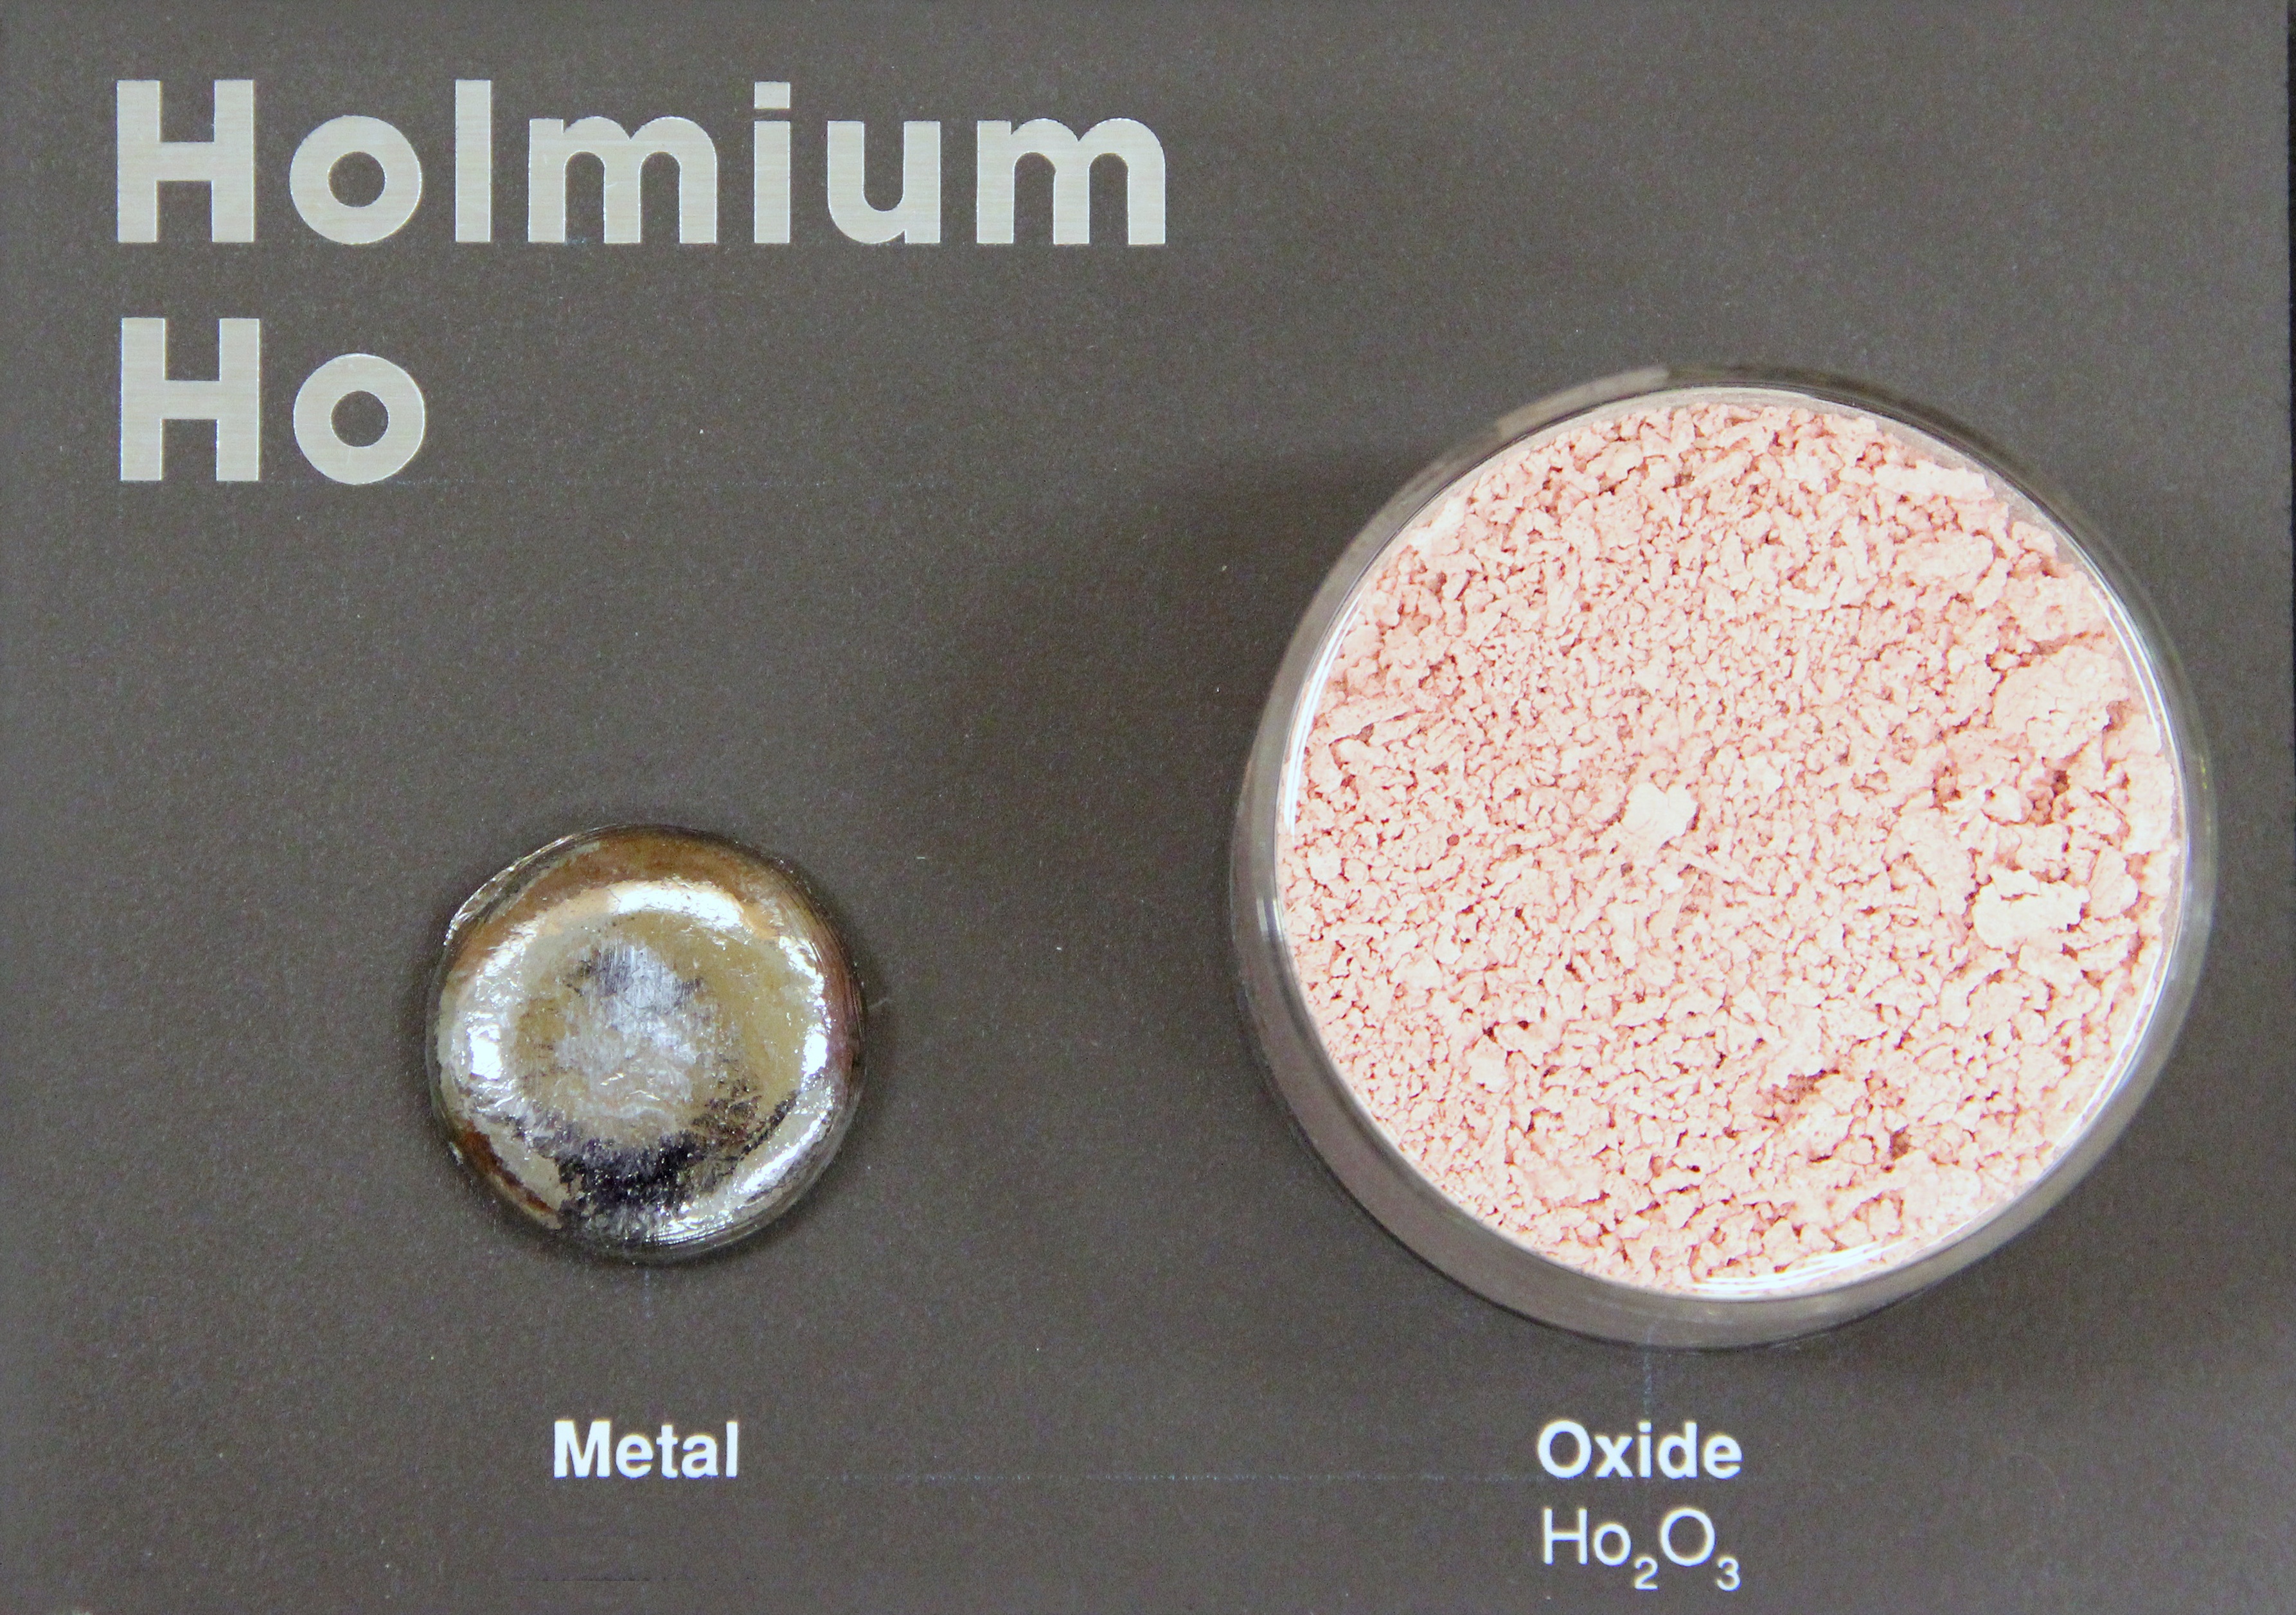 Holmium metal and oxide